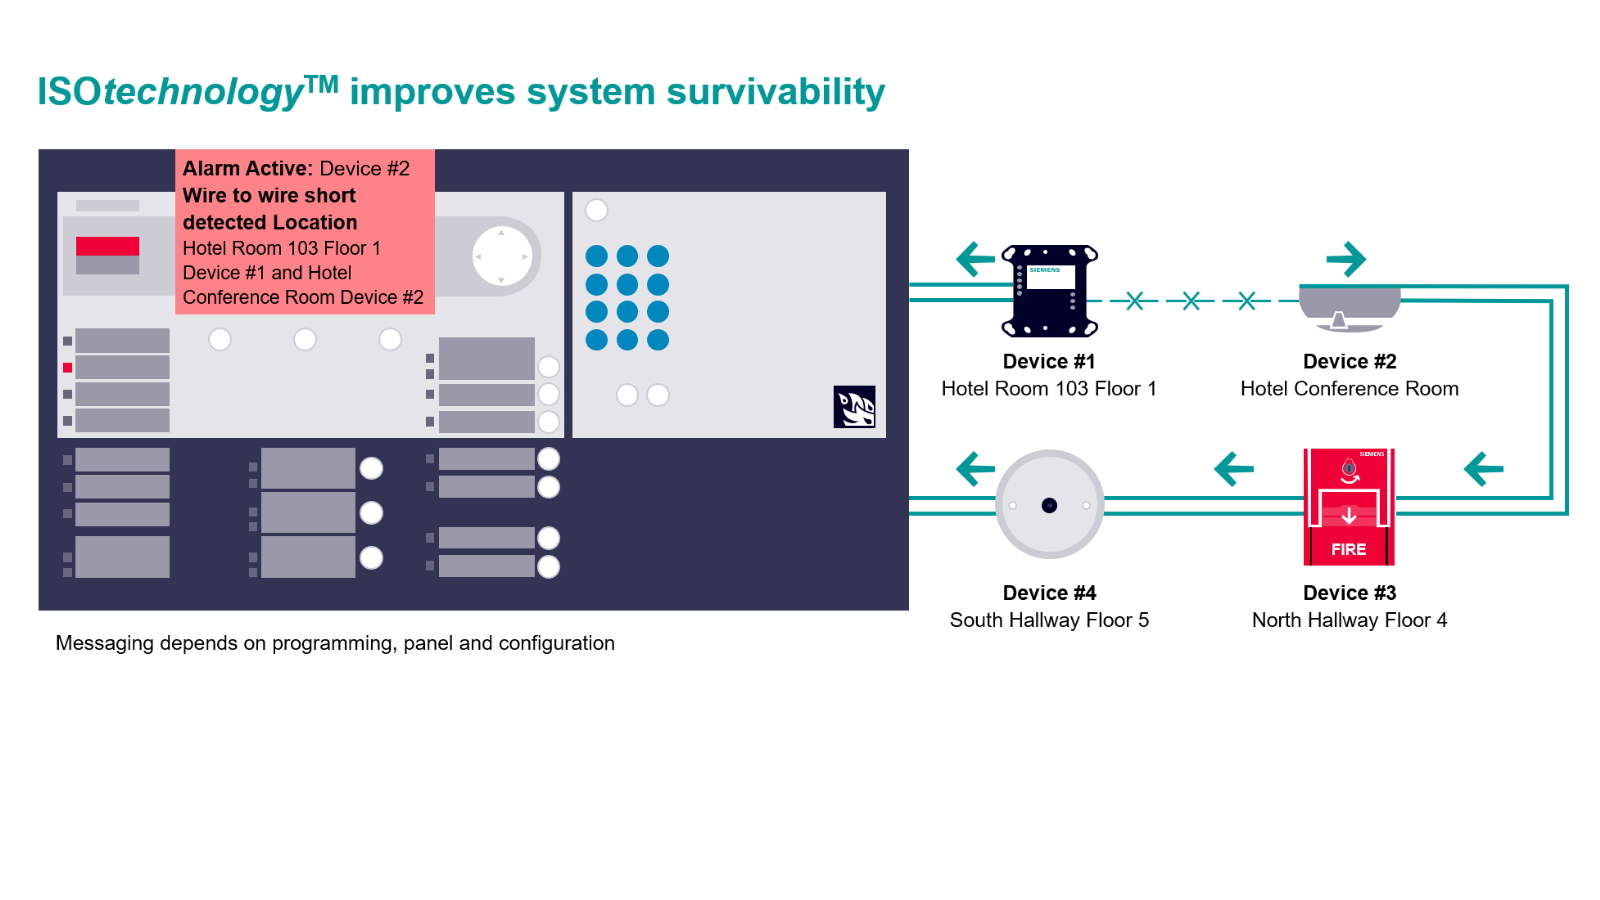 ISOtechnology improves system survivability